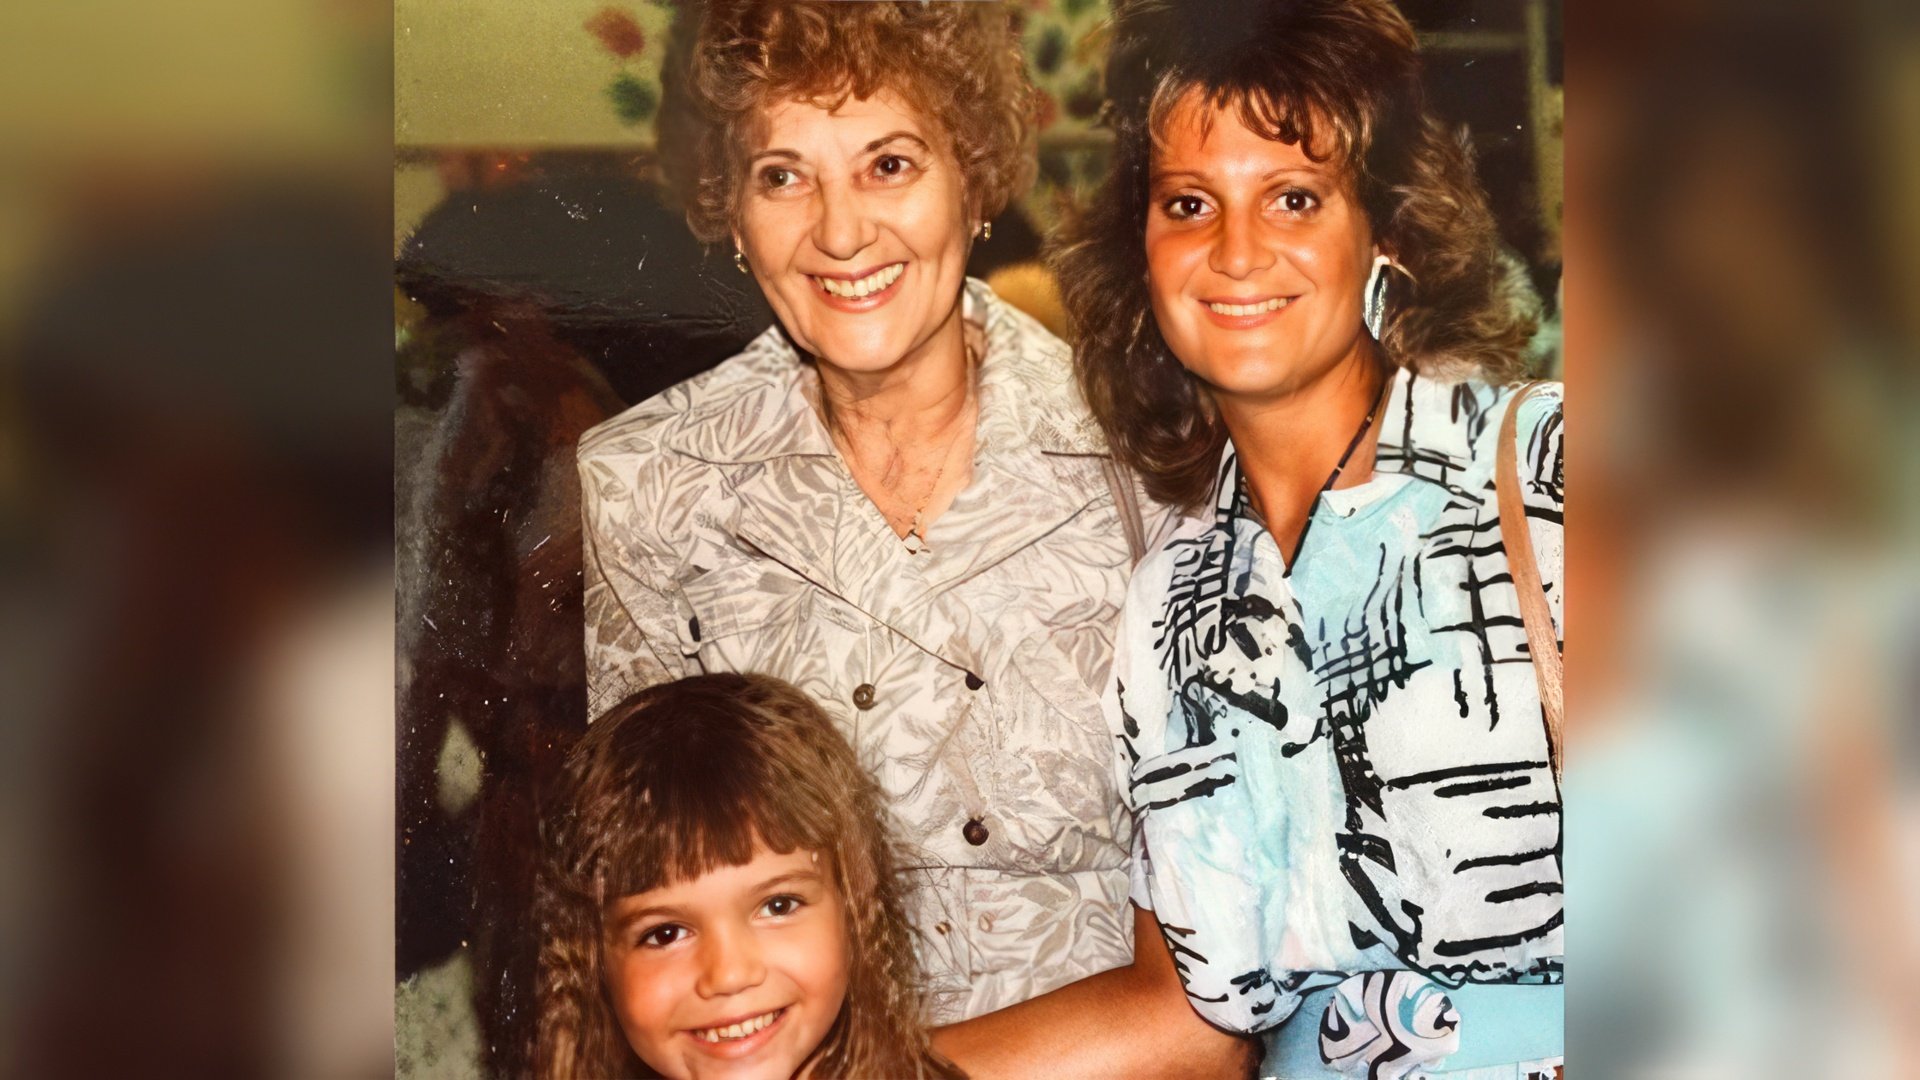 Mandy Moore as a child with her mother and grandmother